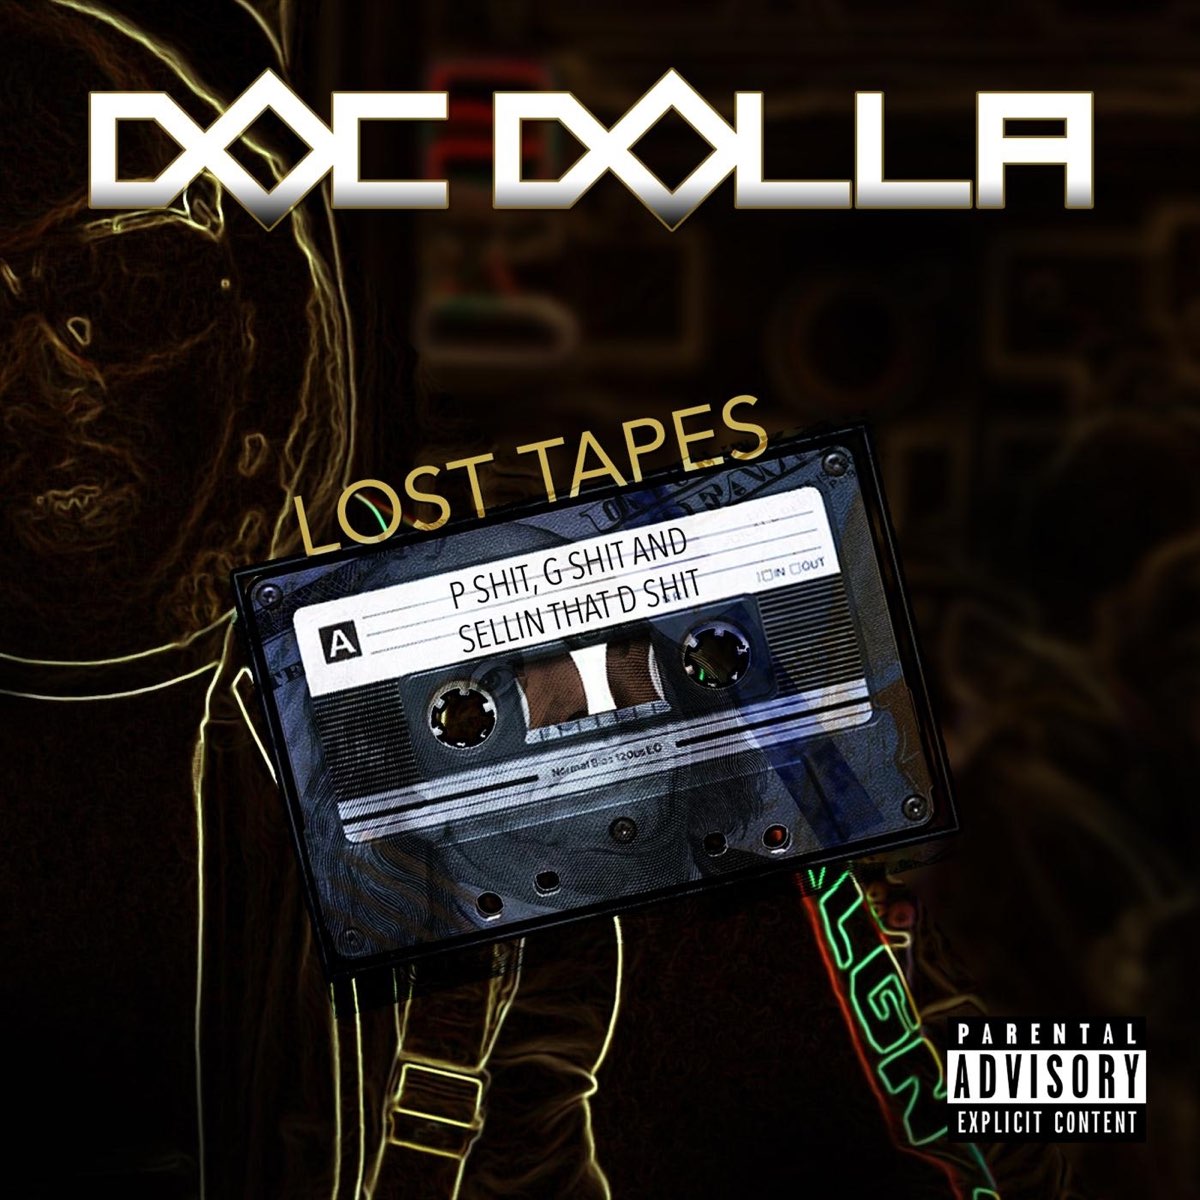 Doc Dolla - Lost Tapes P Shit, G Shit And Selling That D Shit